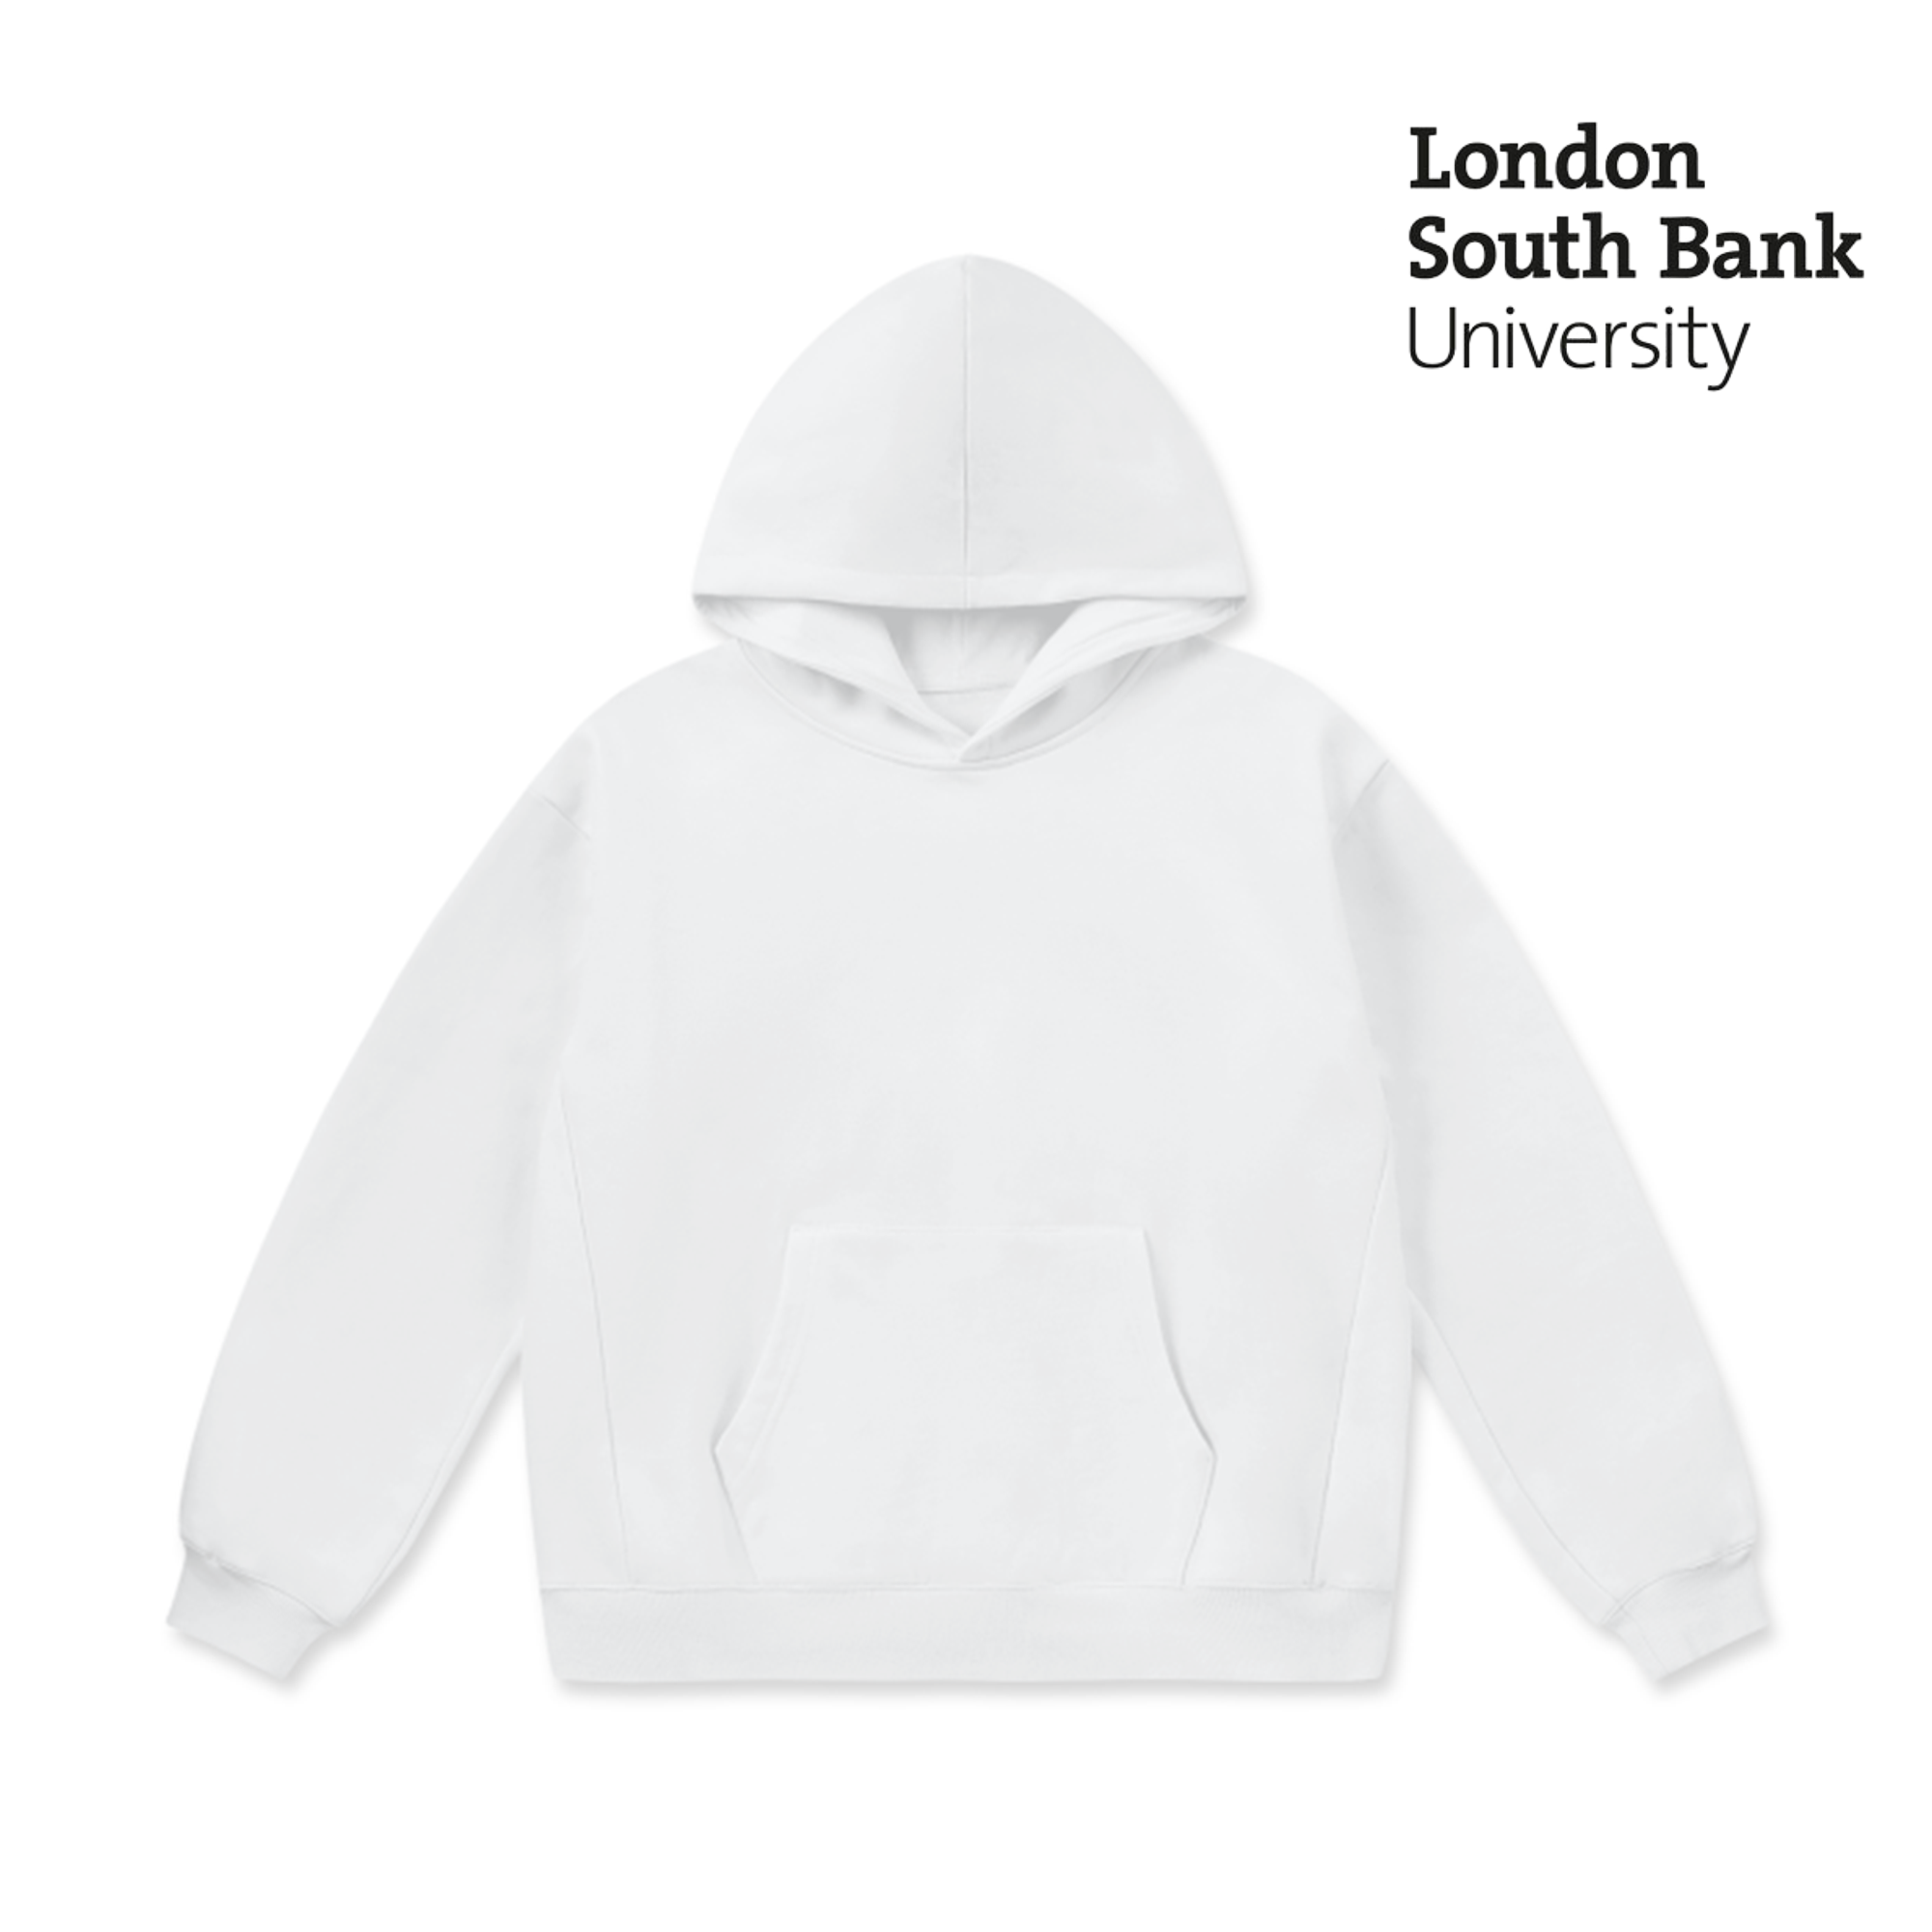 LCC Super Weighted Hoodie - London South Bank University (Modern Ver.2)